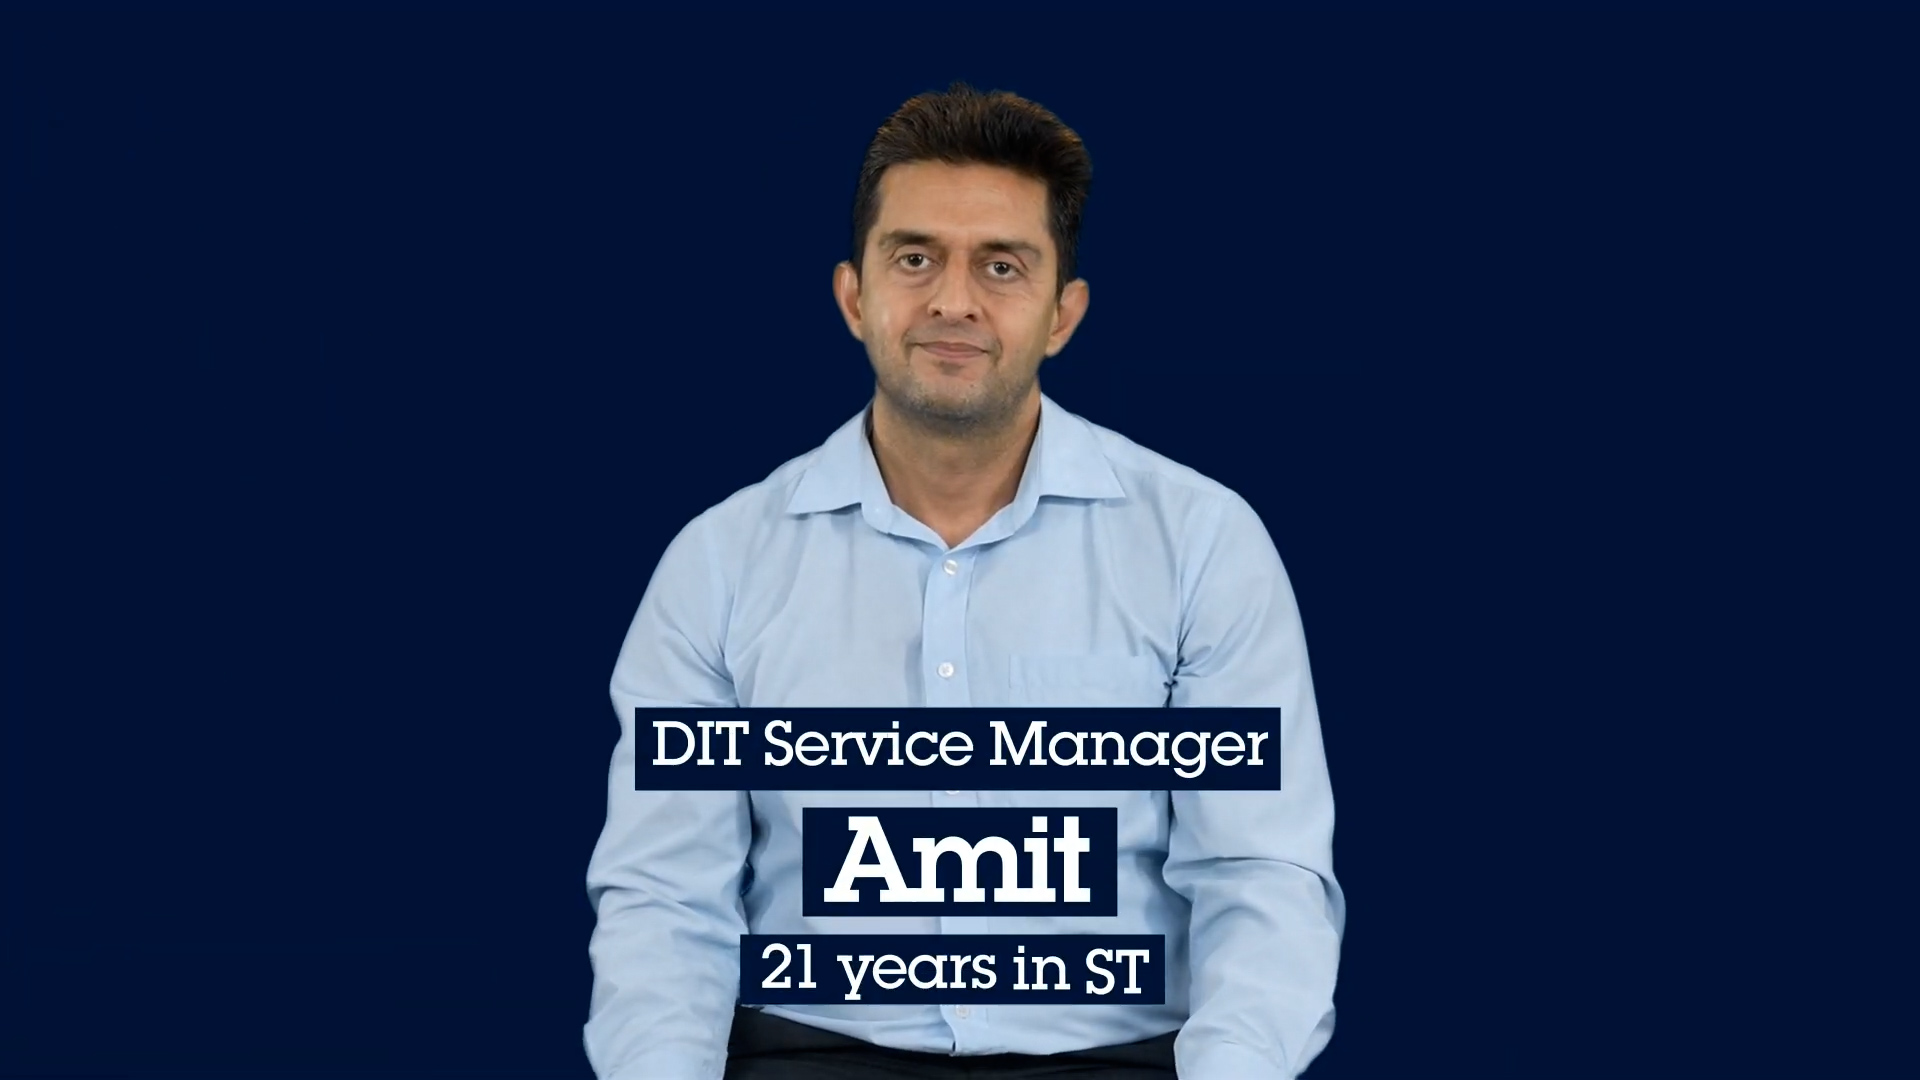 【ST Career】STMicroelectronics Amit - DIT Service Manager